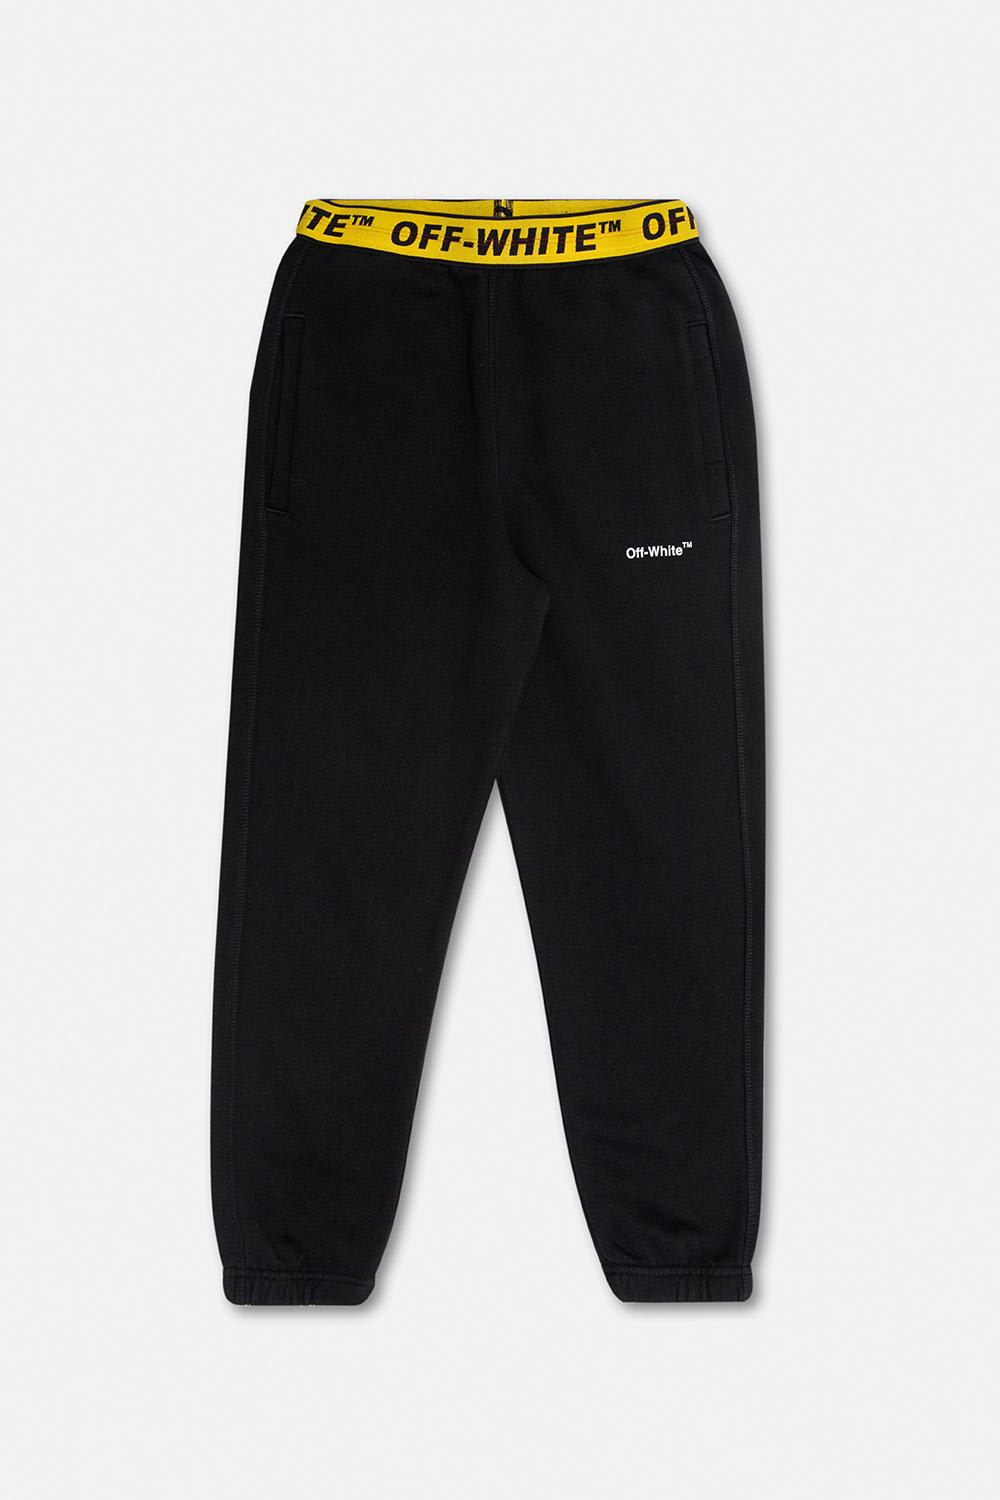 OFF-WHITE SWEATPANTS WITH POCKETS